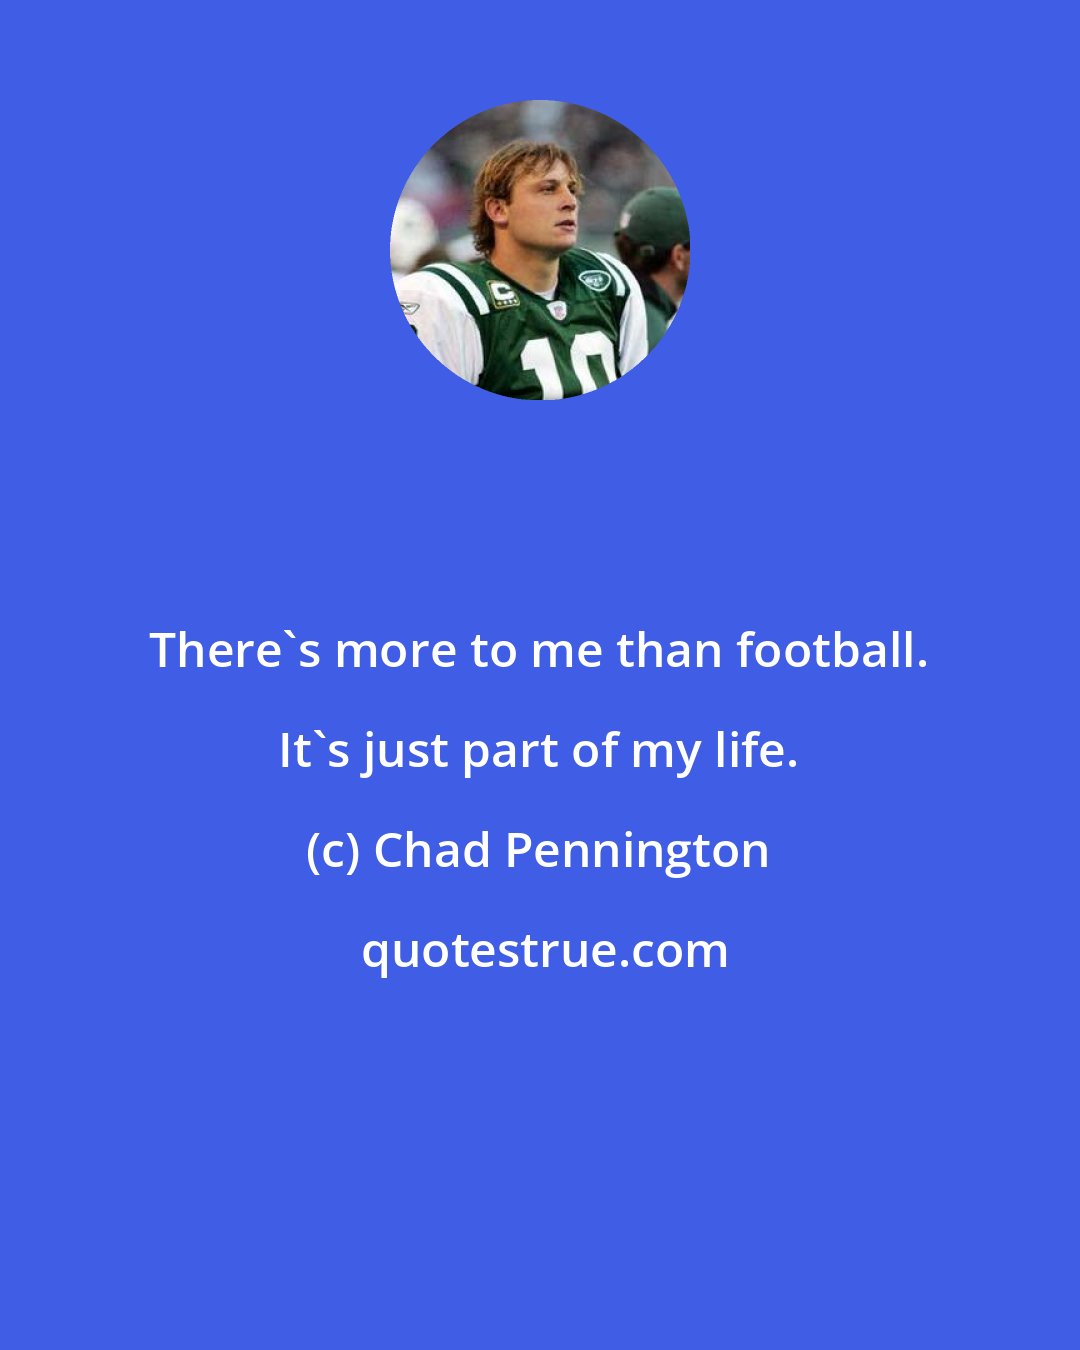 Chad Pennington: There's more to me than football. It's just part of my life.